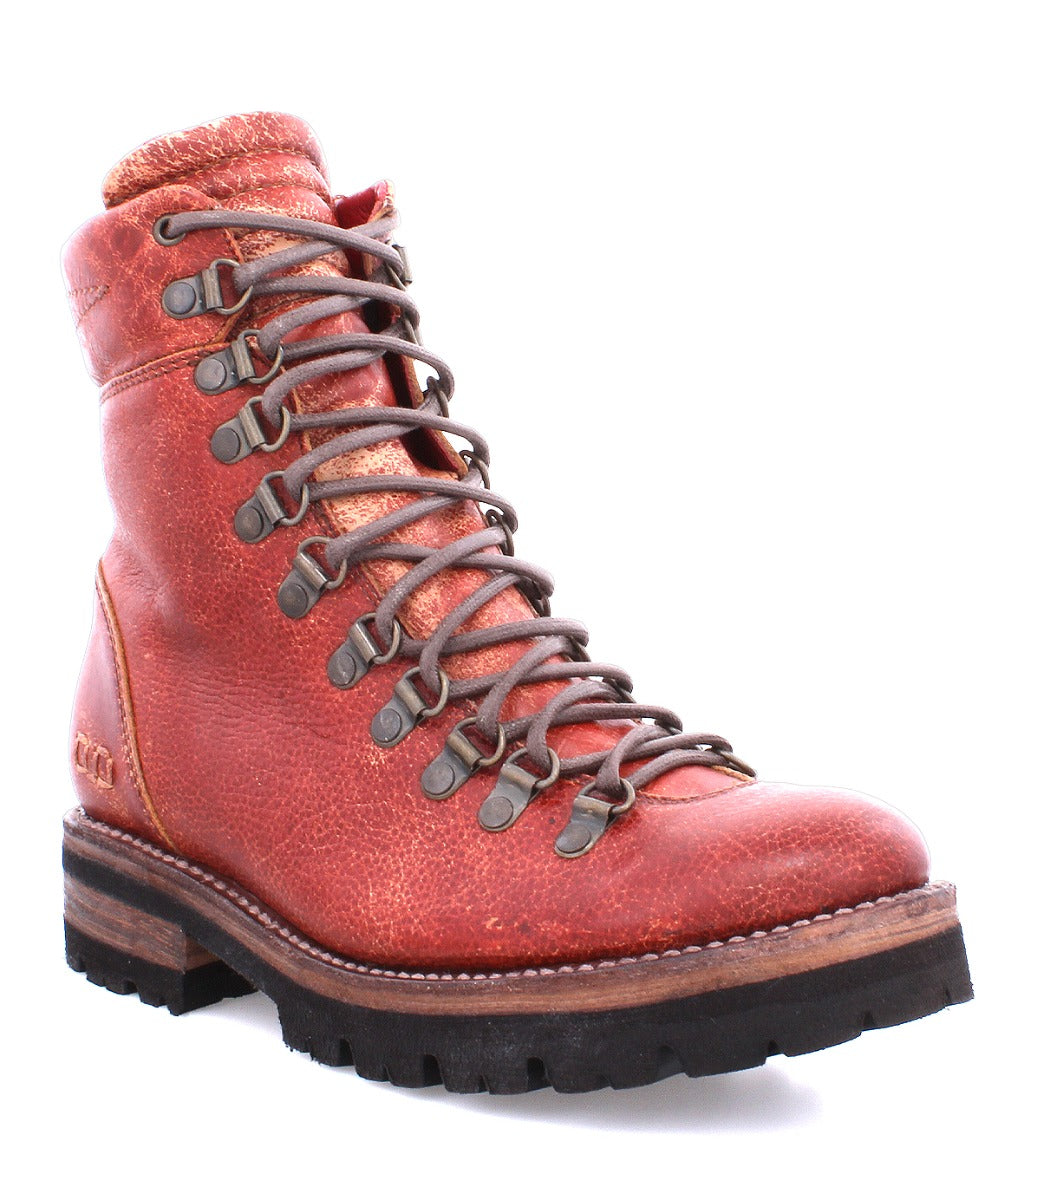 A Khya boot by Bed Stu, made of red leather with brown laces.